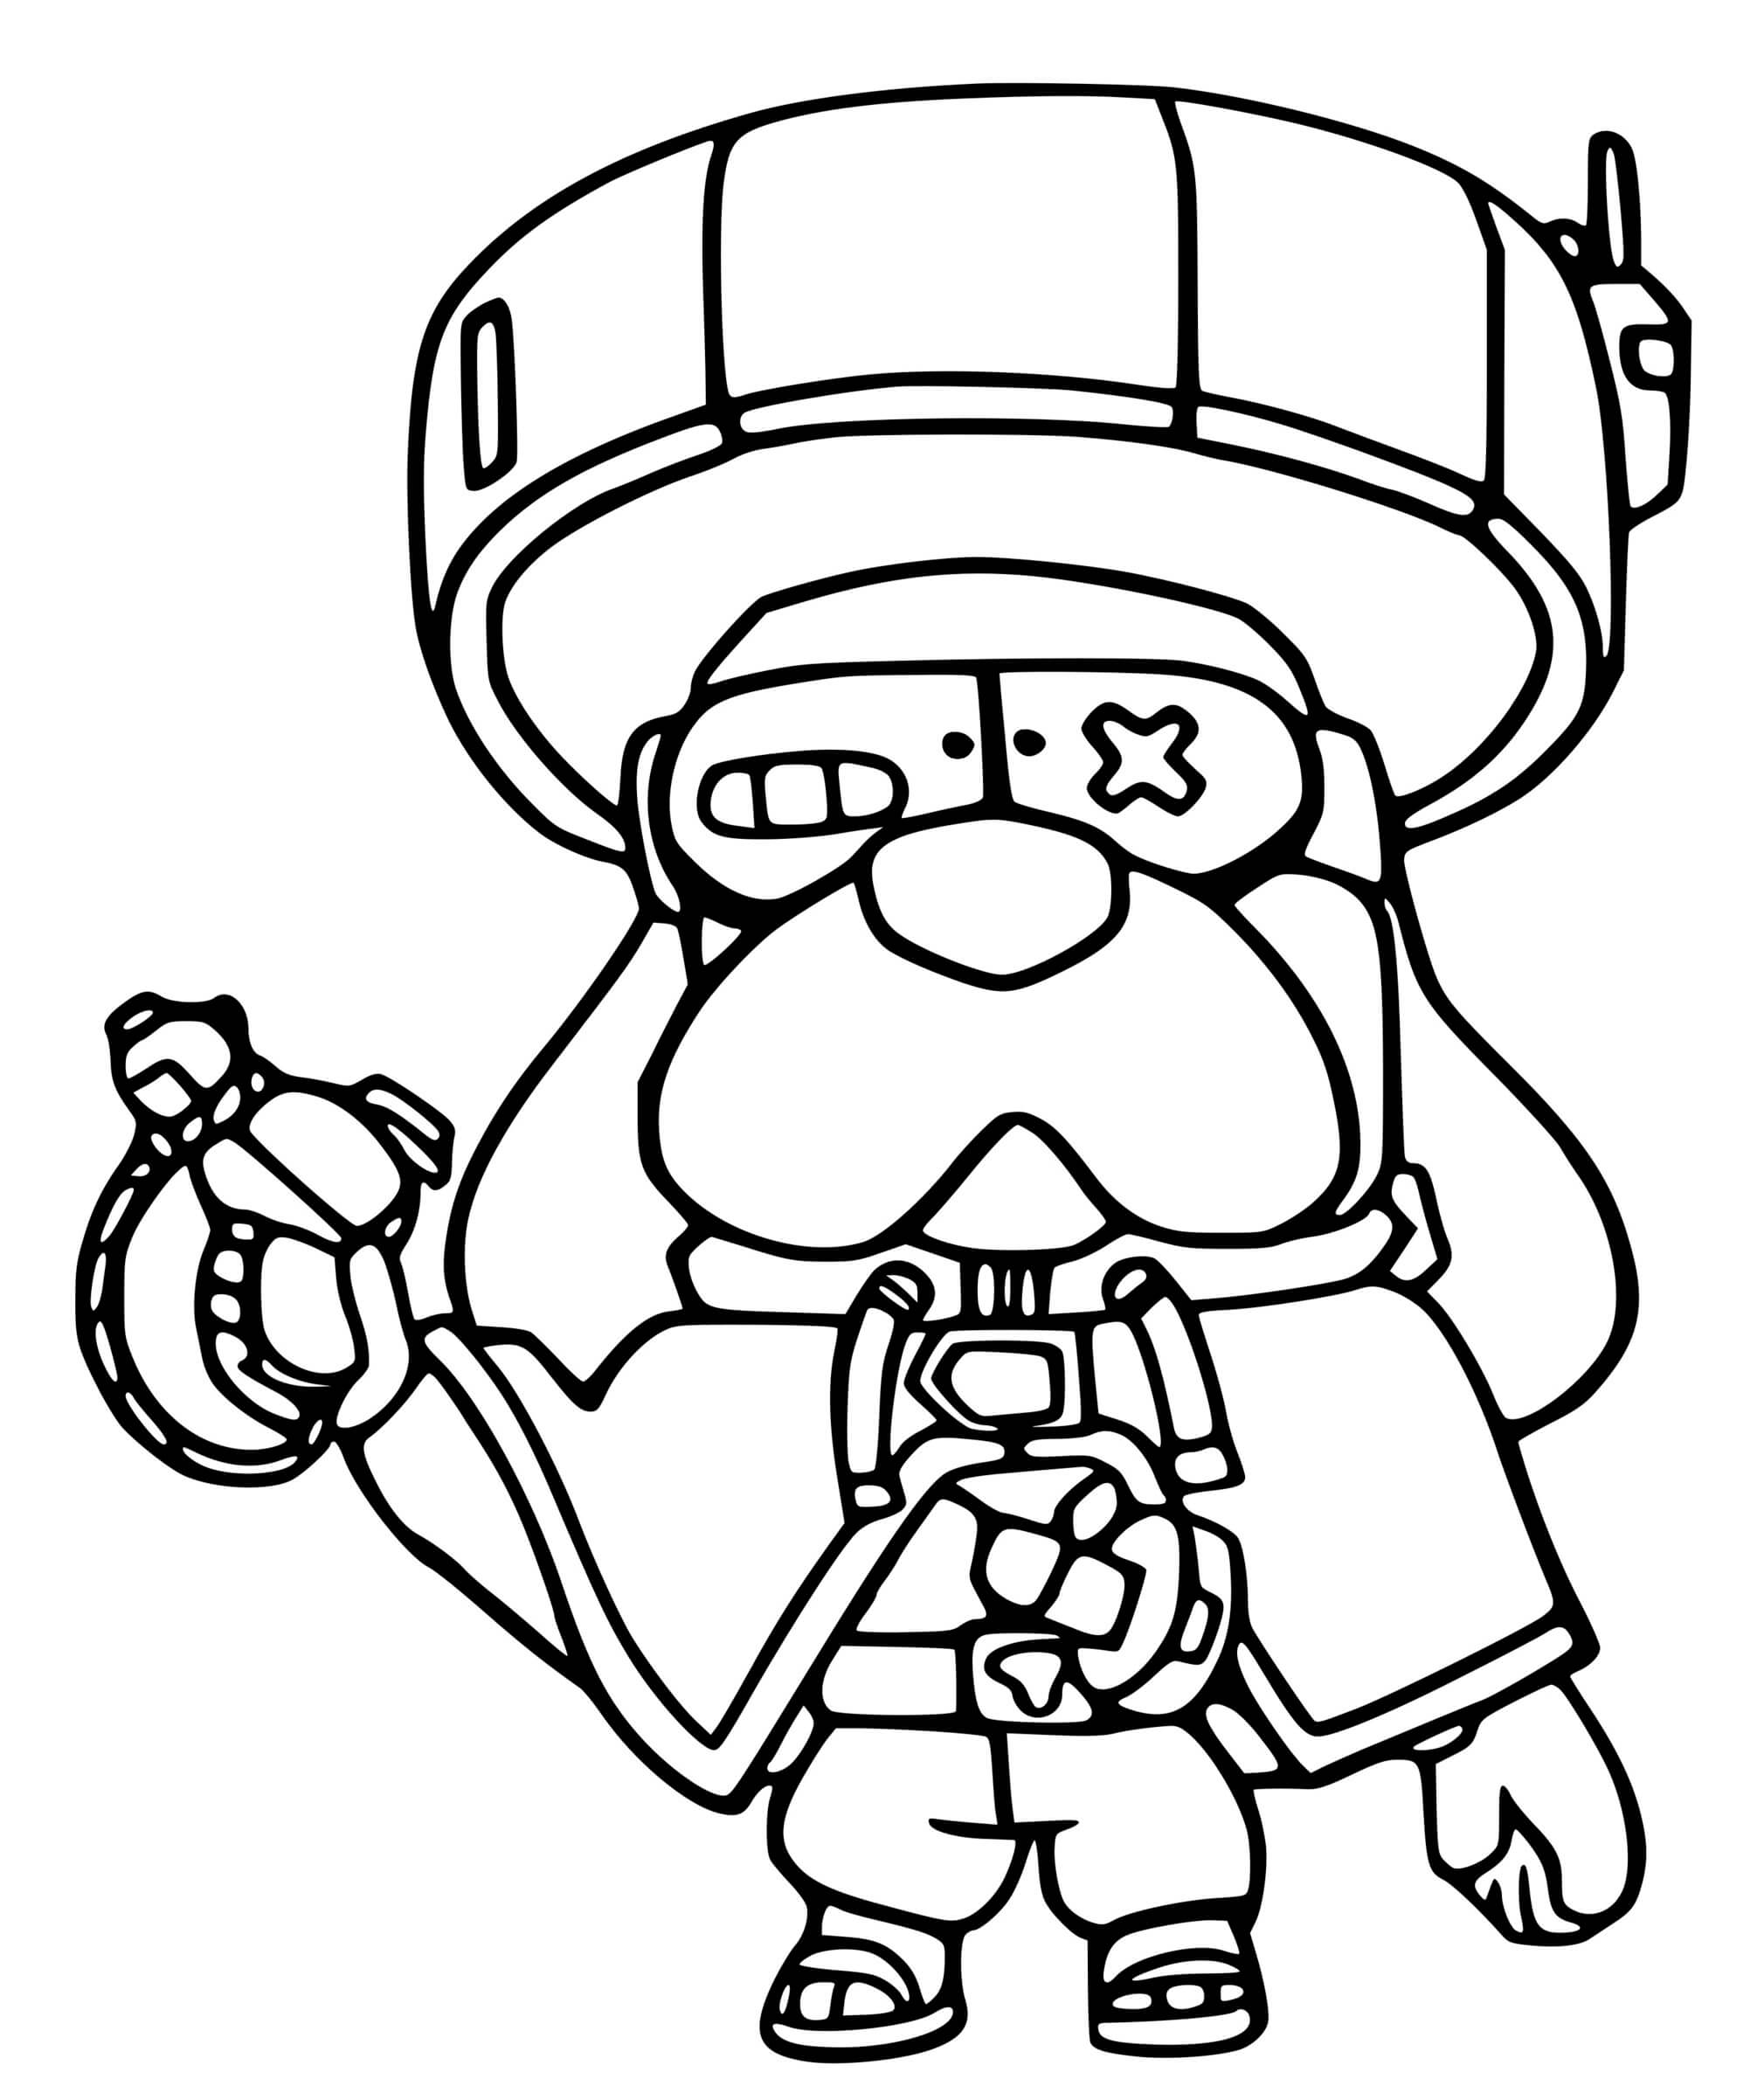 Brawl Stars Force Starr Medor Ronin Coloring Page